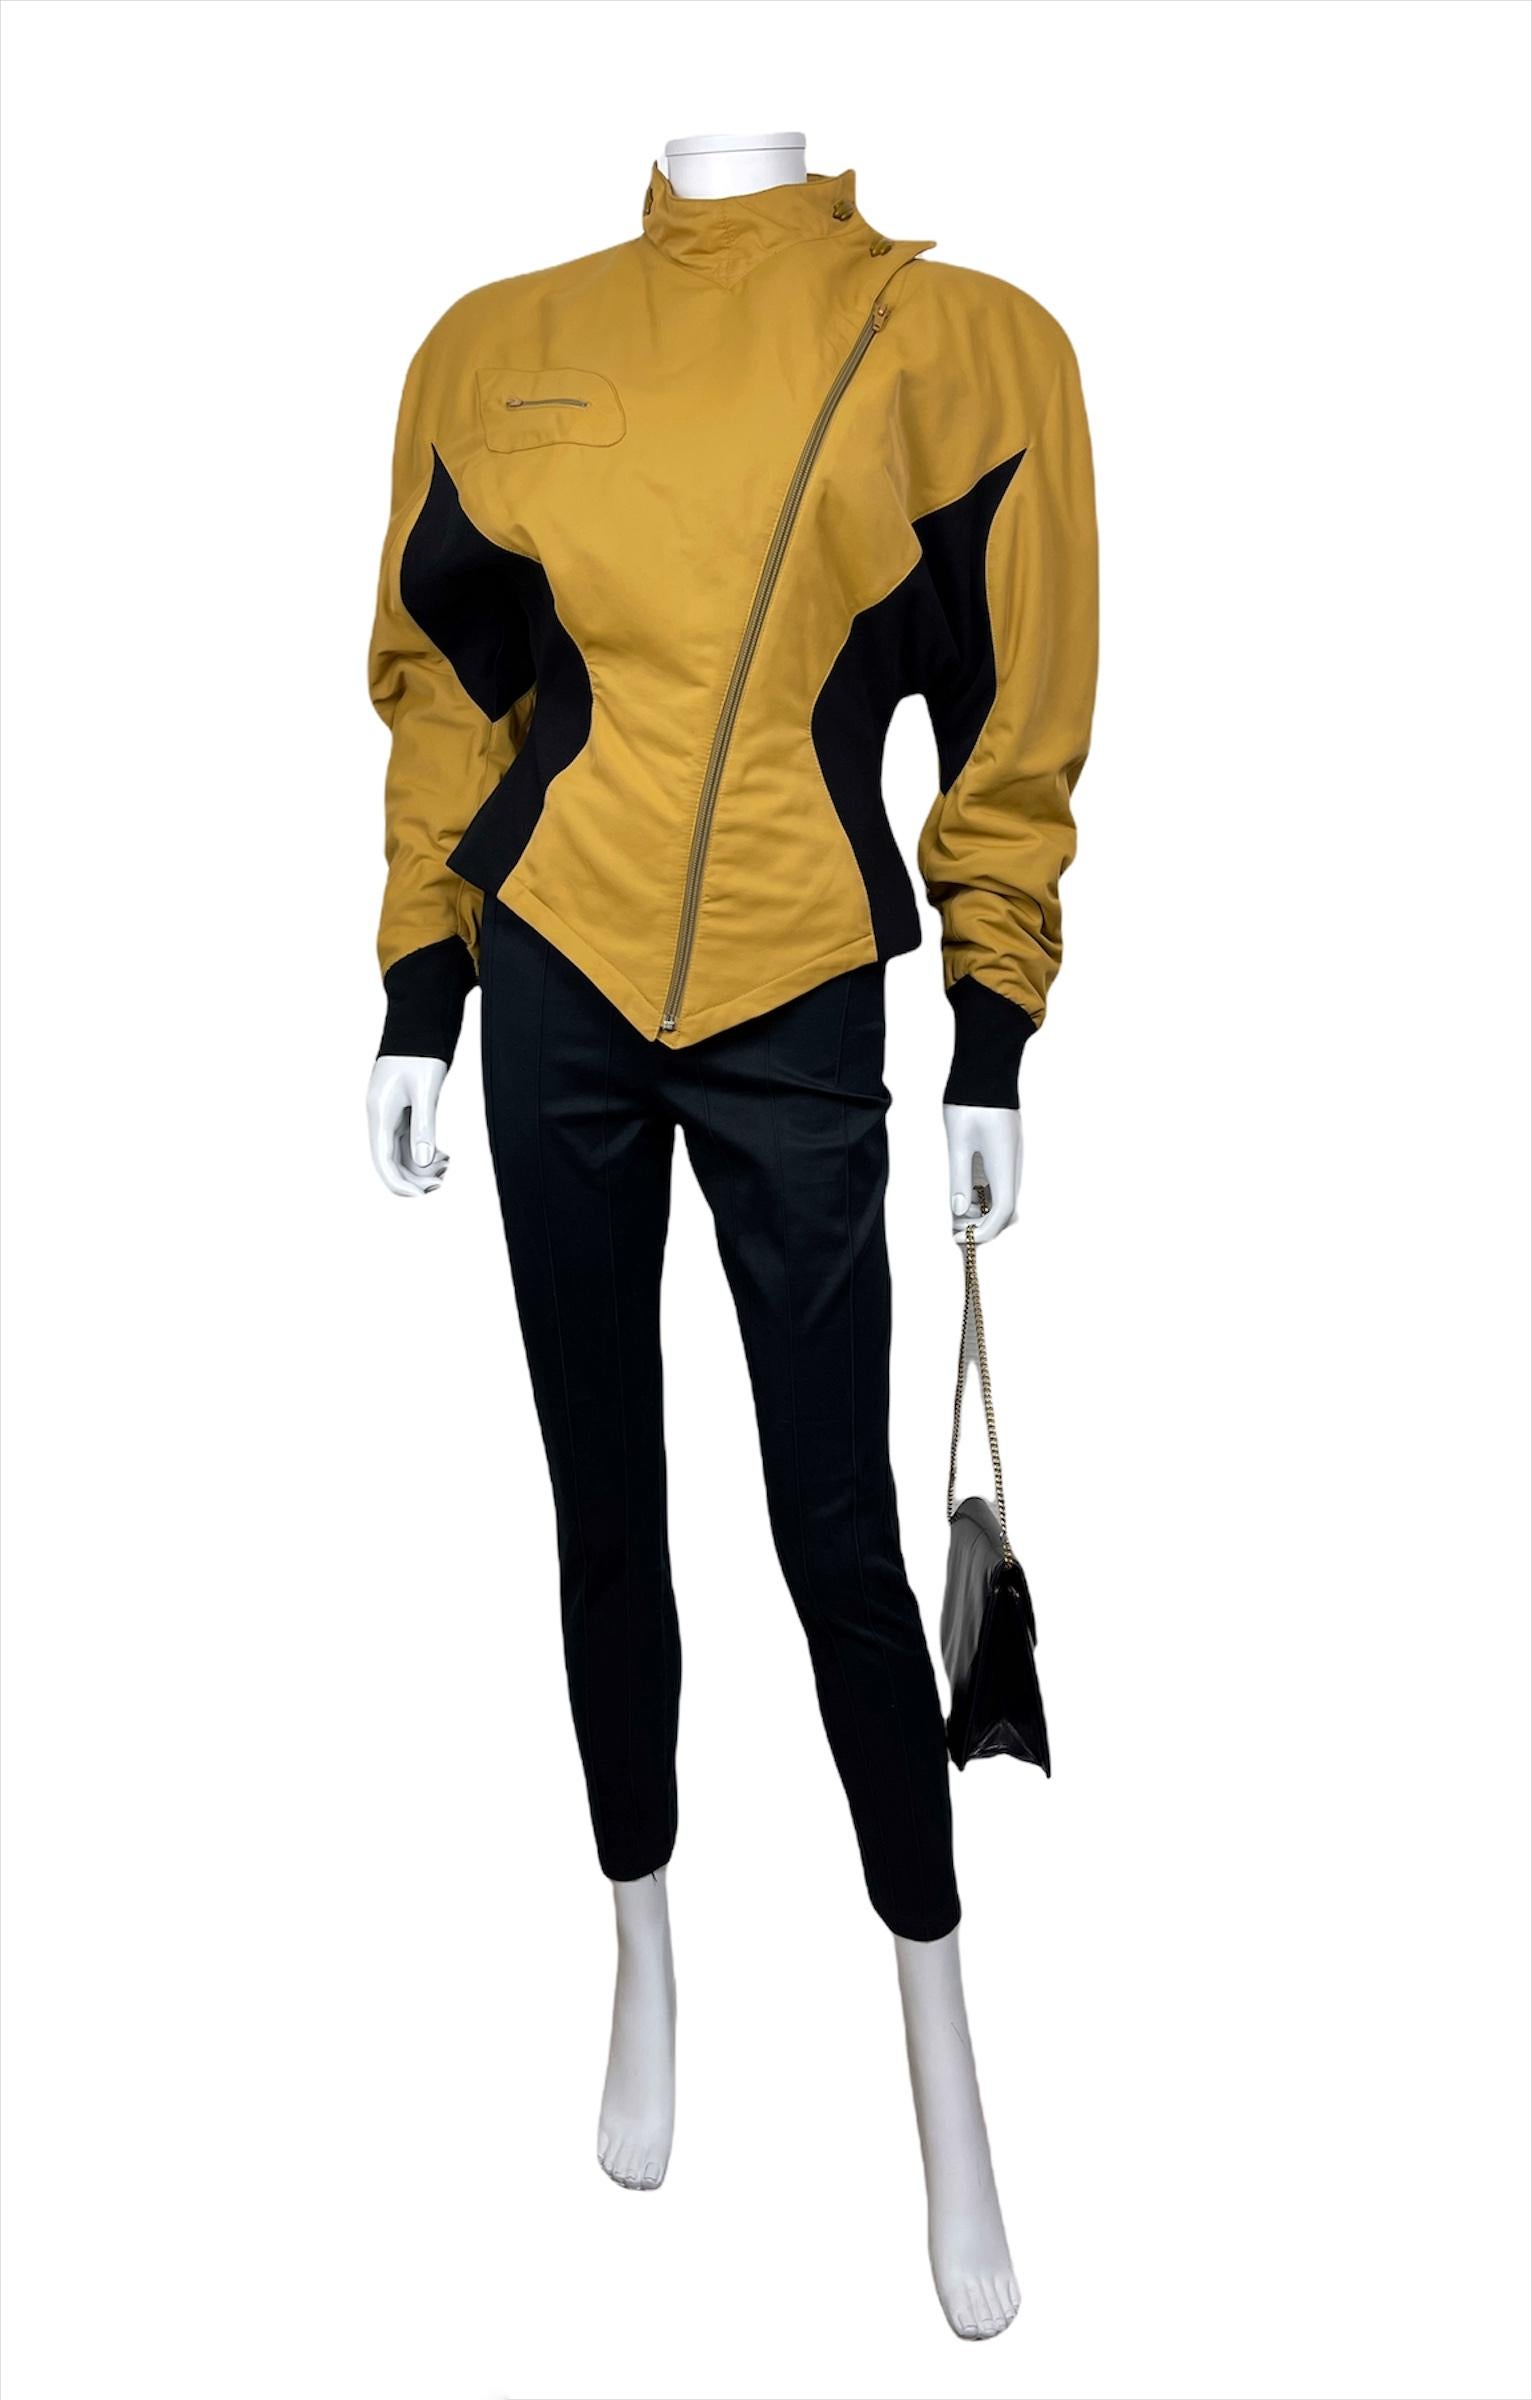 THIERRY MUGLER Activ, circa 86. Made in Italy. 
Two-tone mustard yellow and black jacket with wide shoulders and cinched waist. Diagonal zipper. Collar finished with stylized yellow buttons. 45% polyamide 55% polyester. 
Tag size is 42IT,